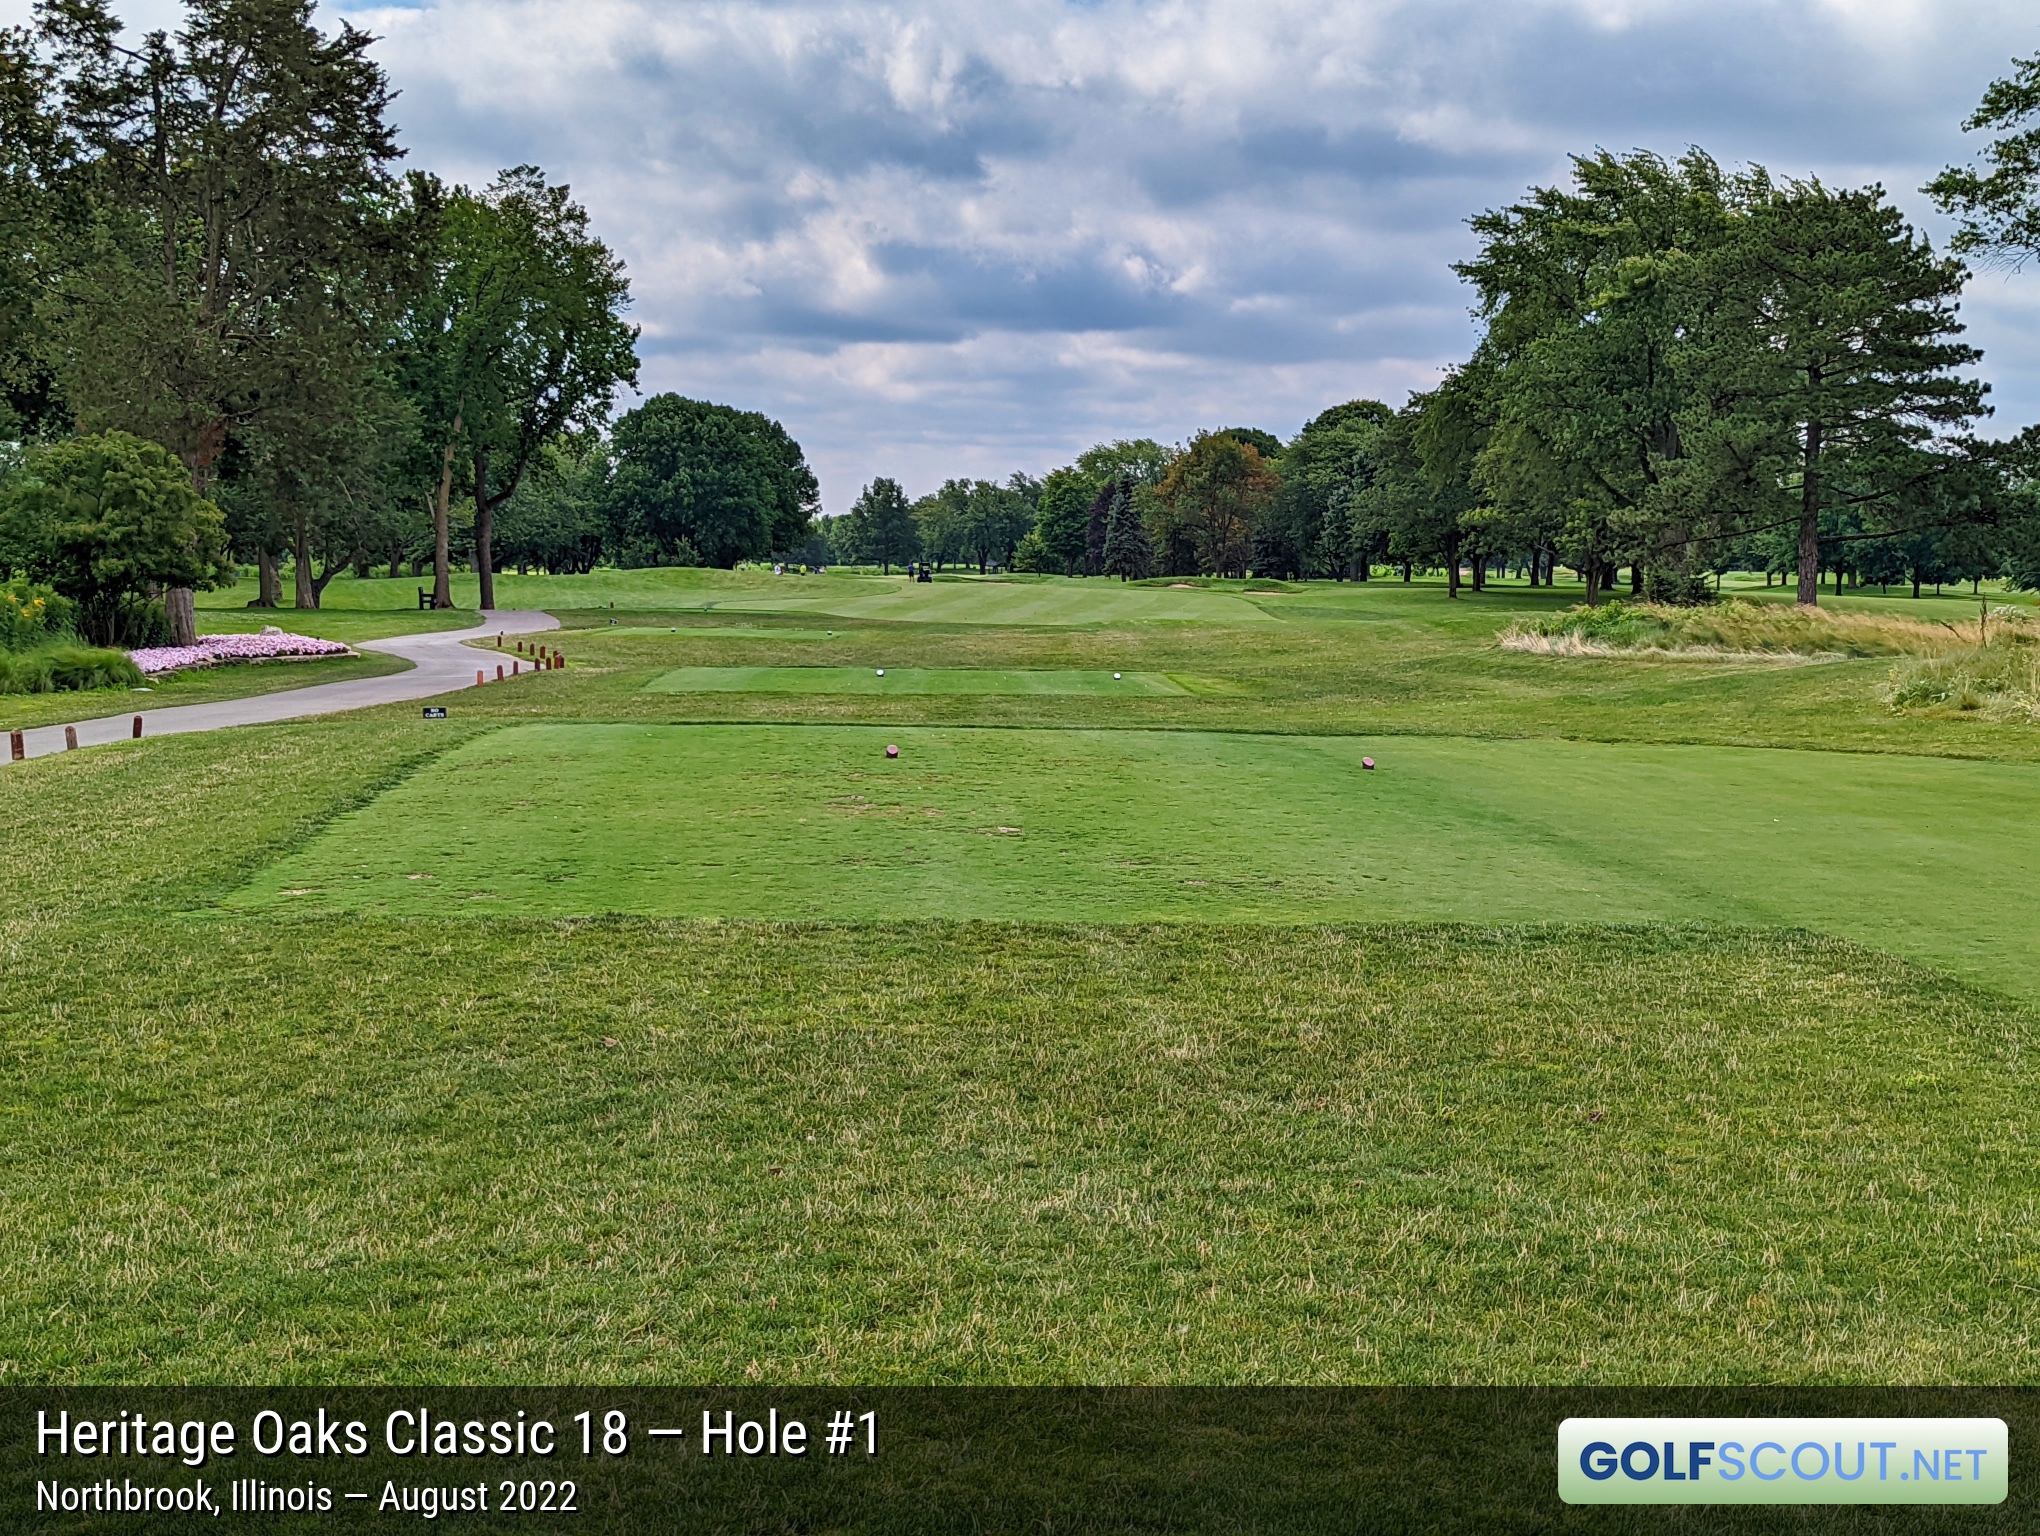 Photo of hole #1 at Heritage Oaks Golf Club - Classic 18 in Northbrook, Illinois. 